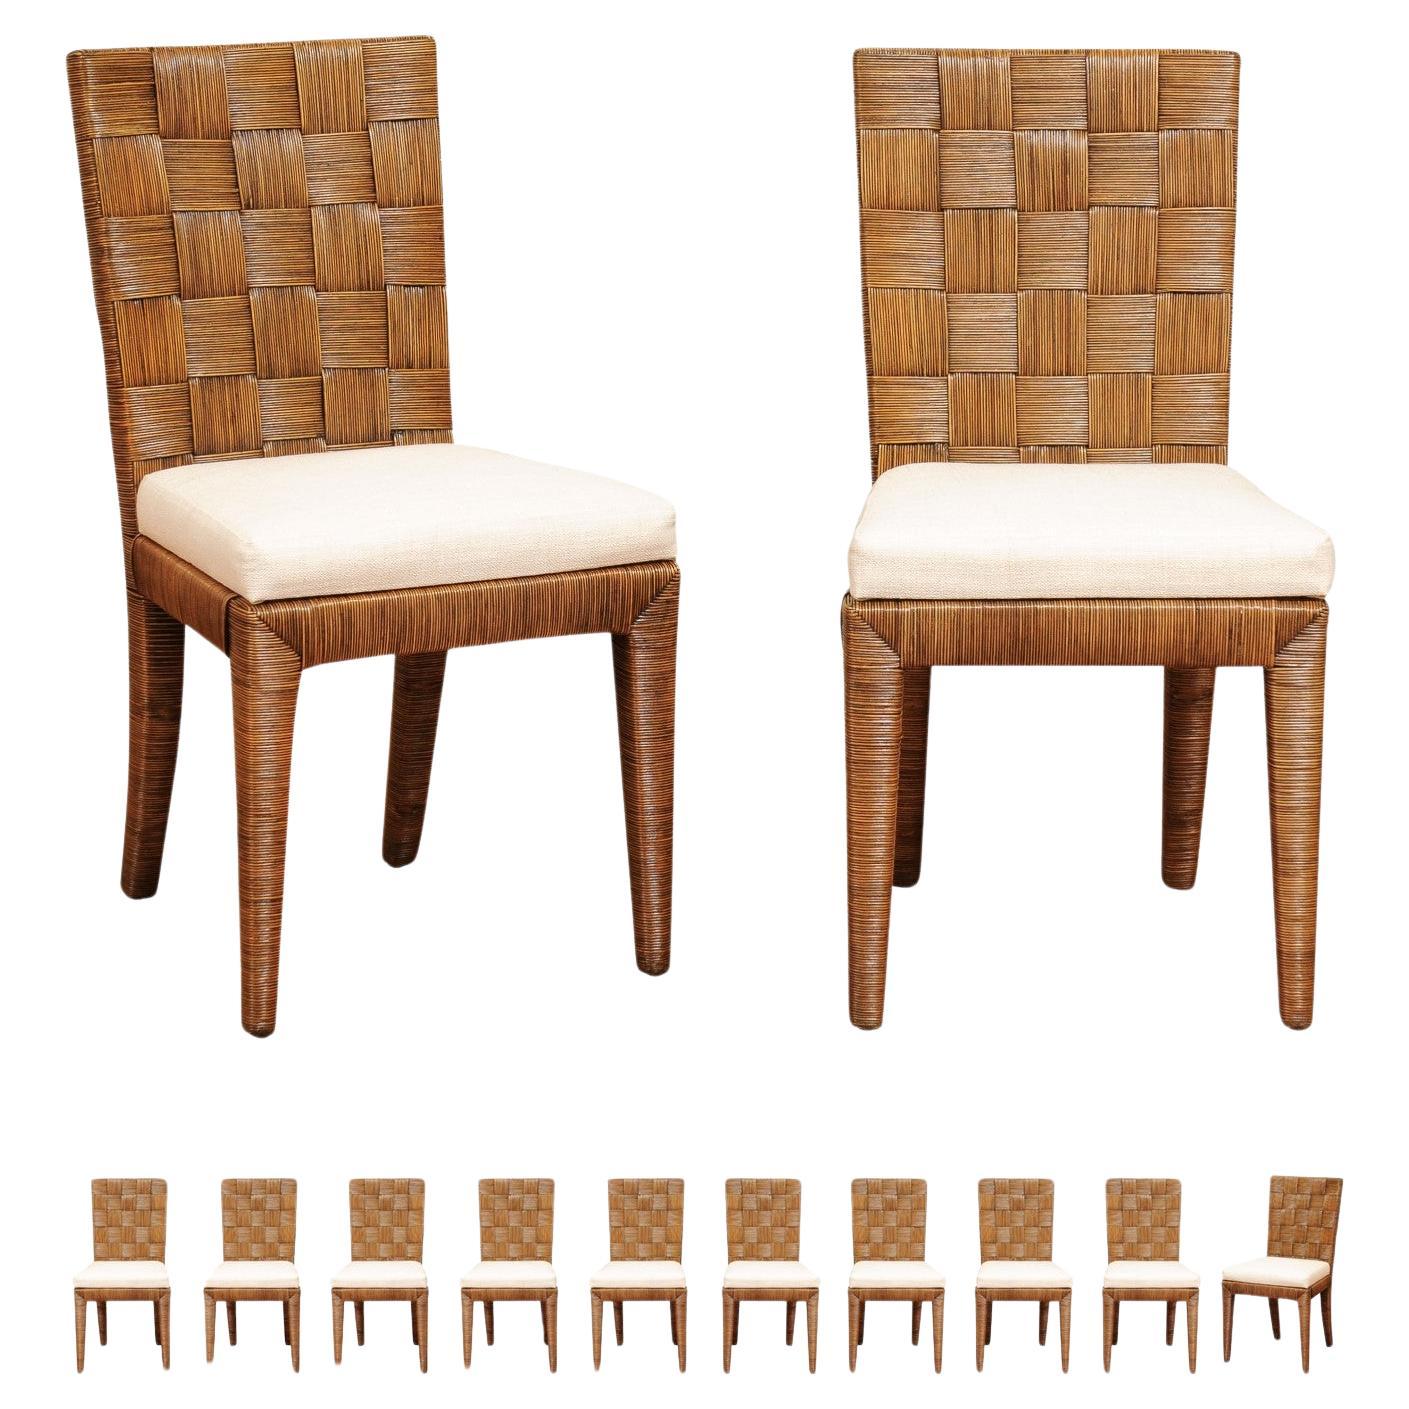 Incredible Set of 12 Vintage Tobacco Cane Chairs by John Hutton for Donghia For Sale